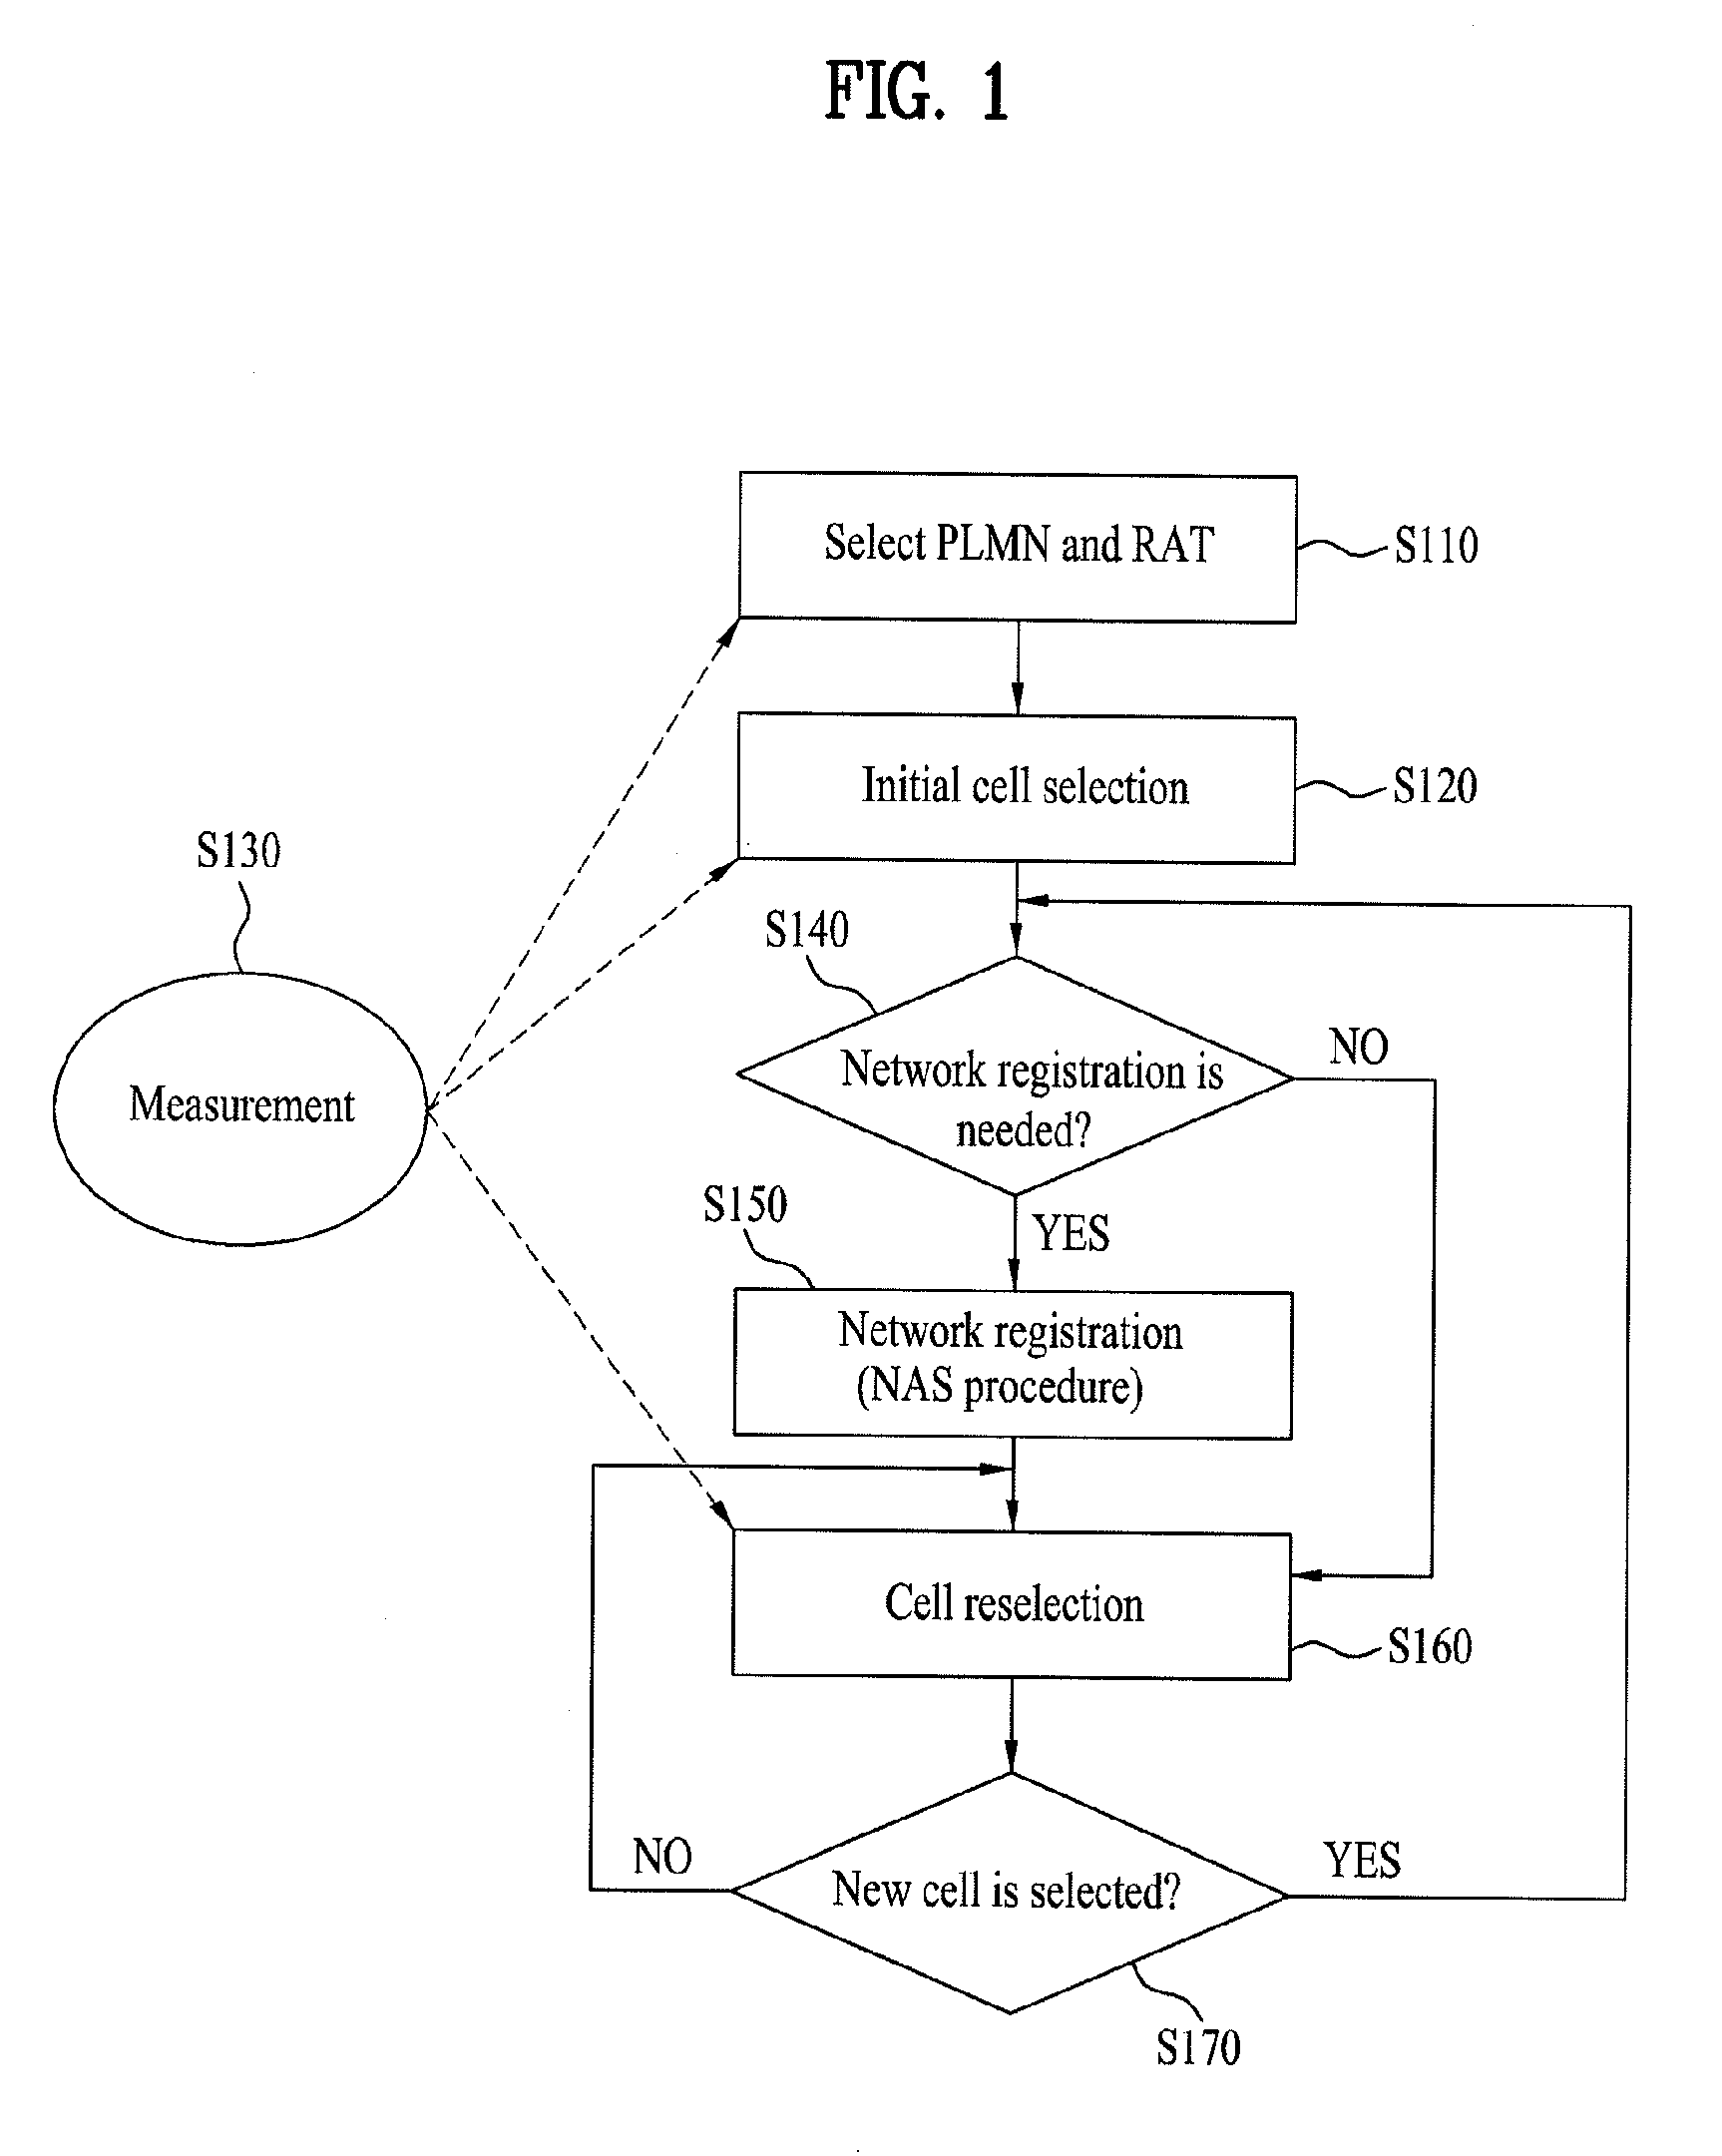 Method of reselecting a cell based on priorities